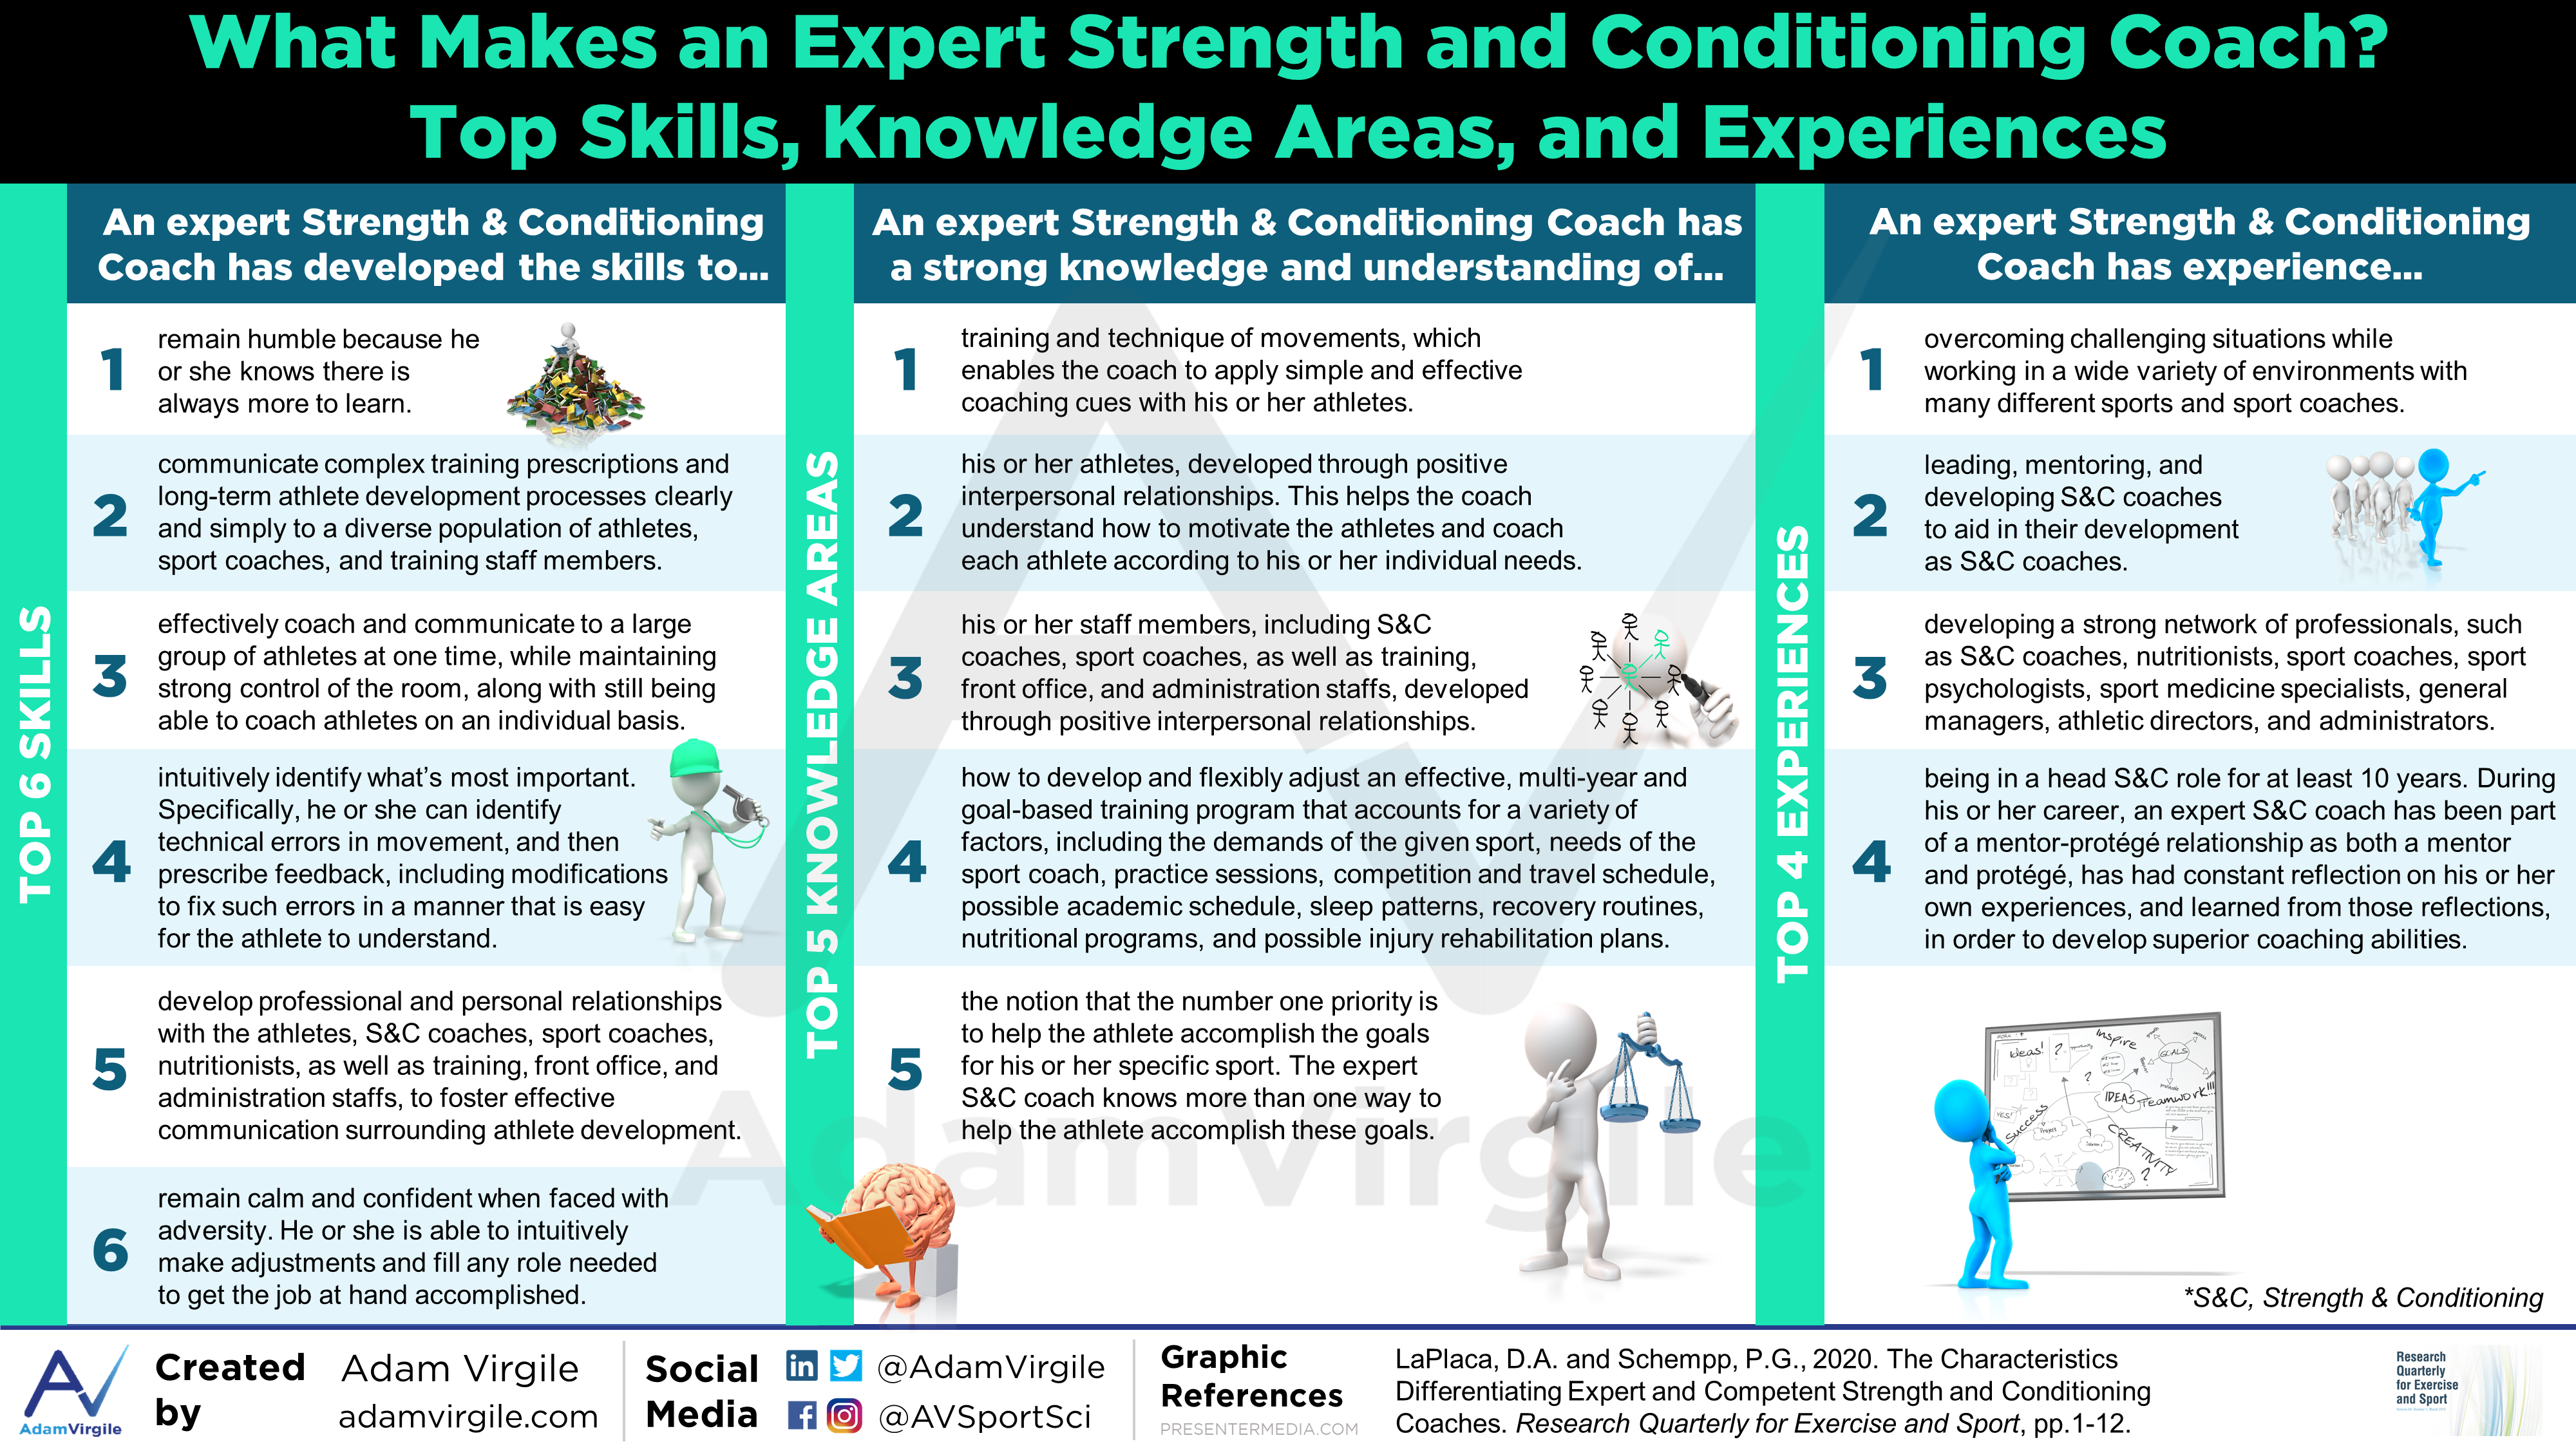 Read more about the article The Characteristics Differentiating Expert and Competent Strength and Conditioning Coaches